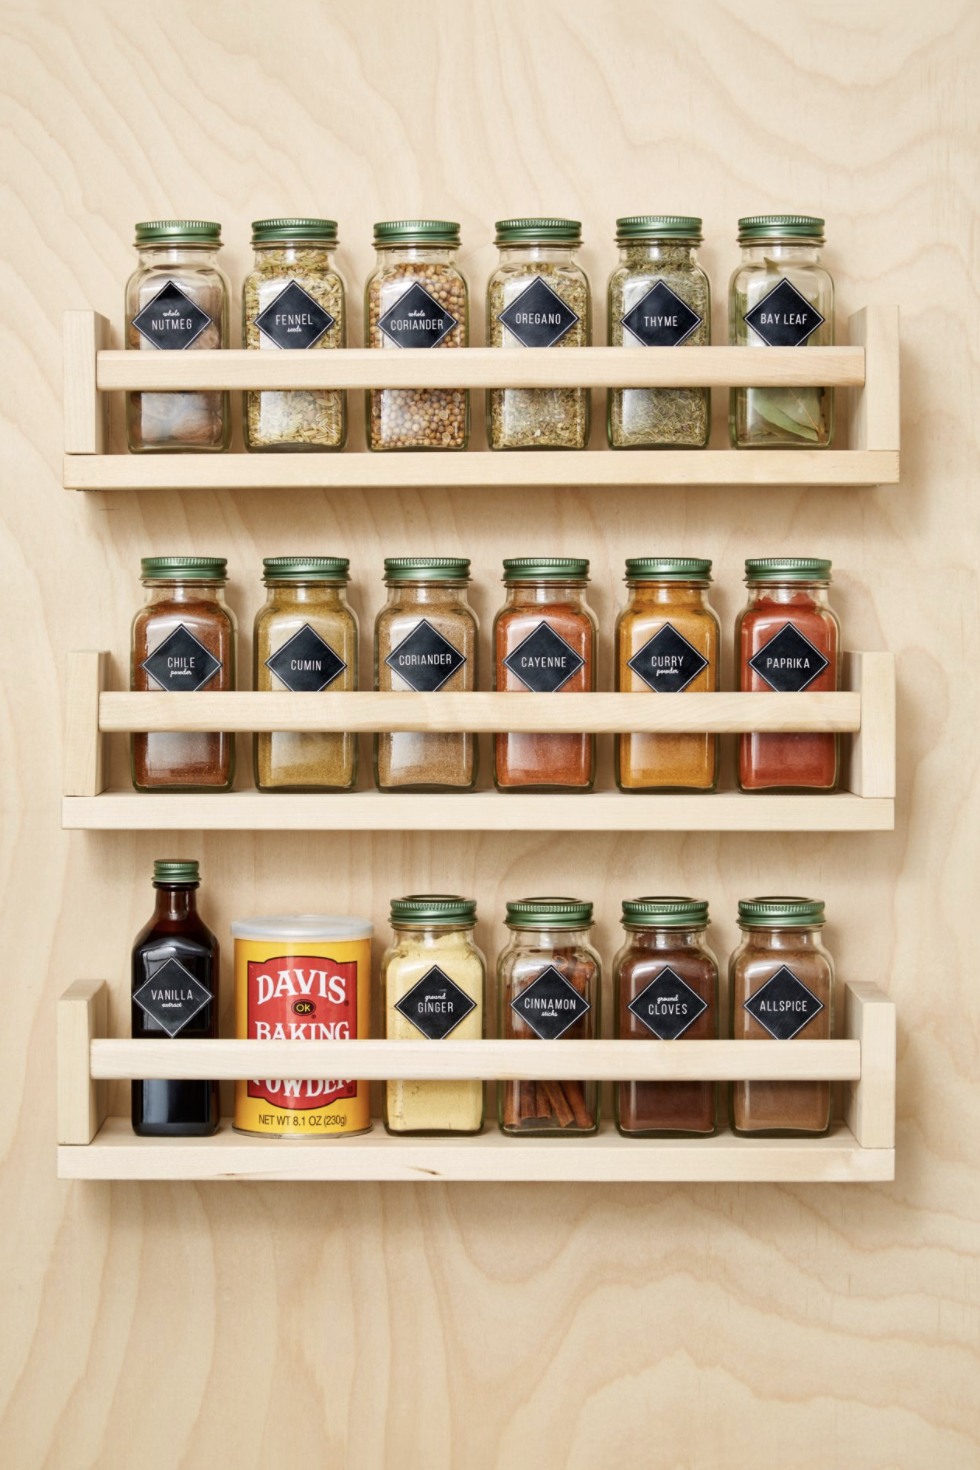 https://hips.hearstapps.com/hmg-prod/images/kitchen-organization-ideas-spice-rack-1649024246.png?crop=1xw:0.9919028340080972xh;center,top&resize=980:*